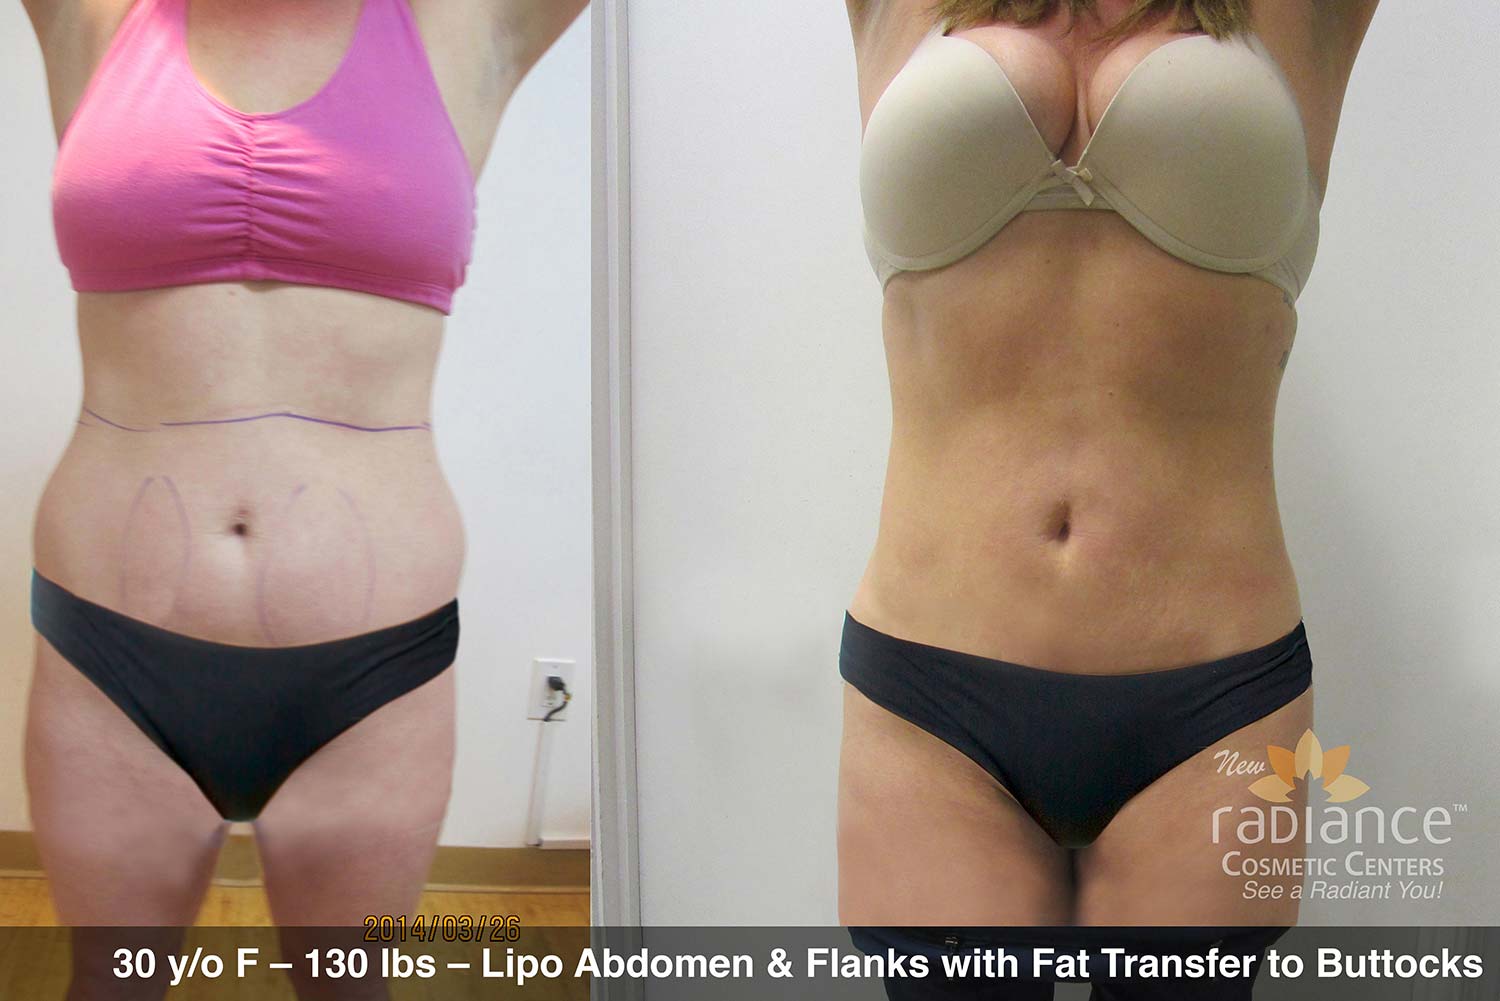 Abdomen and Waist Liposuction - Before and After Photos, flanks